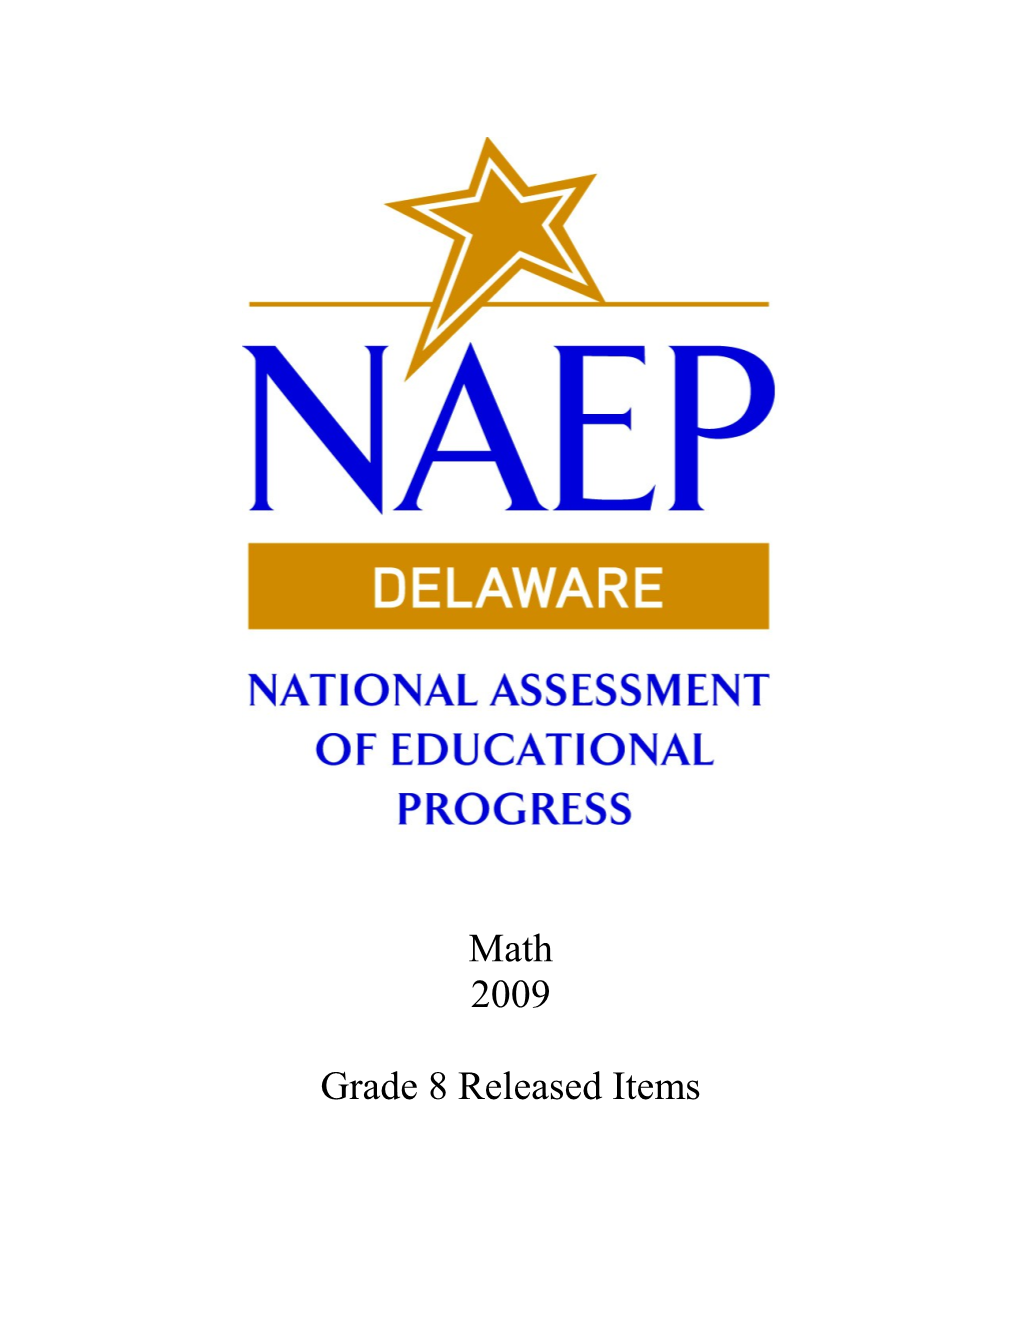 NAEP 2009 Math Grade 8 Released Items